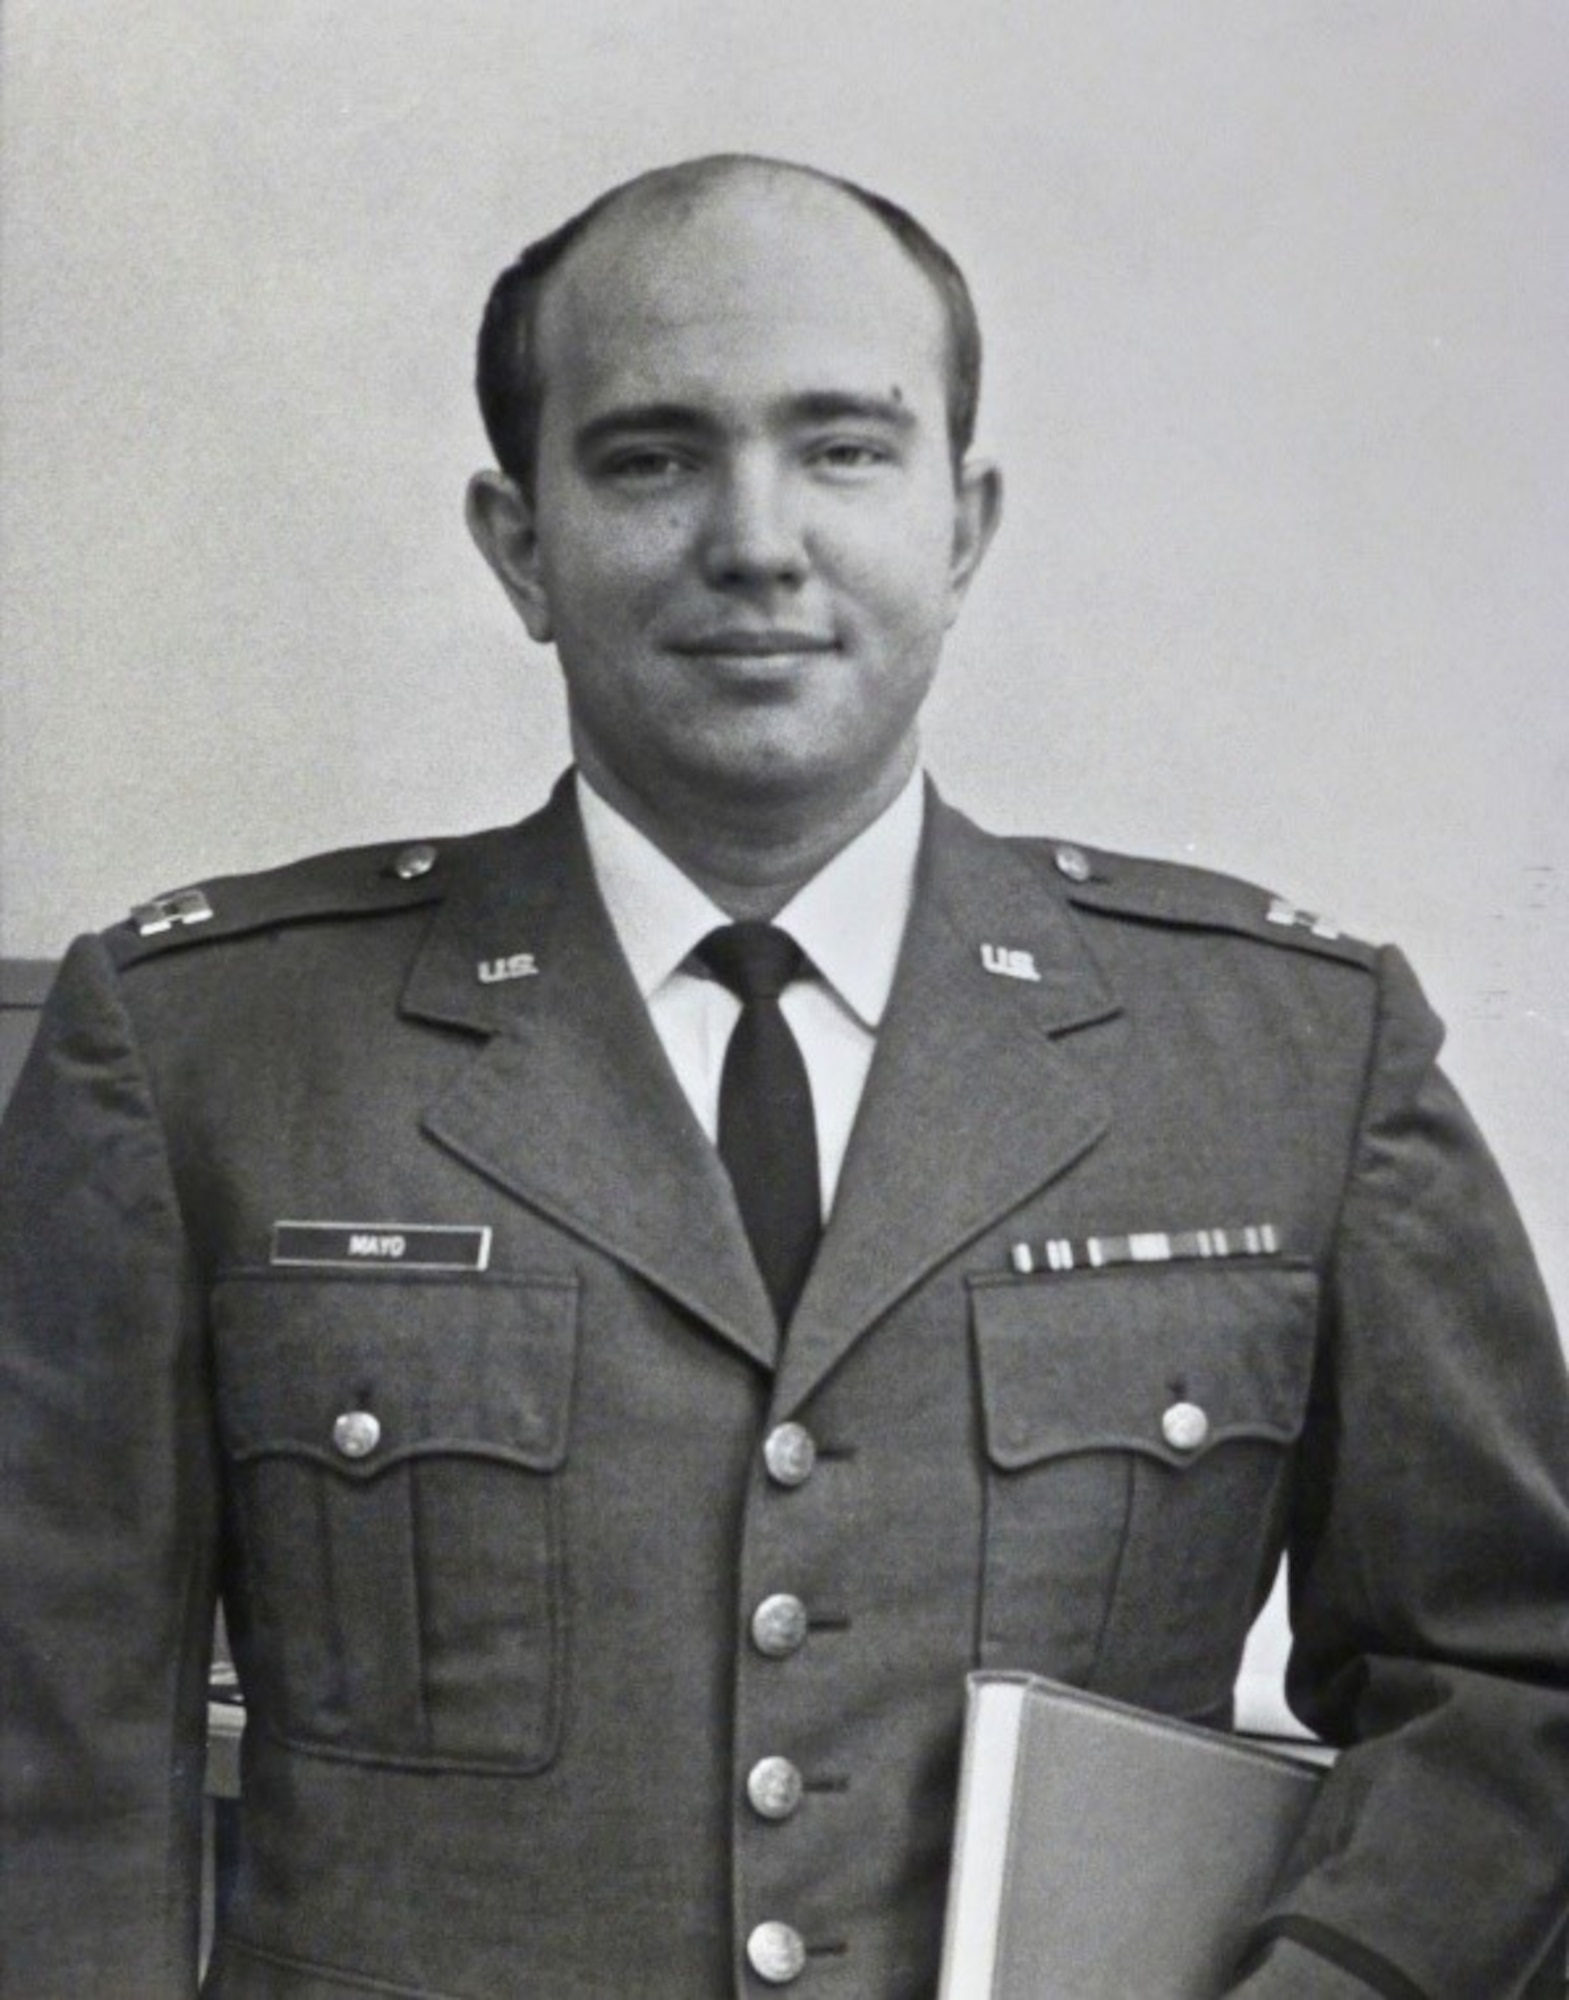 black and white photo of man in military uniform